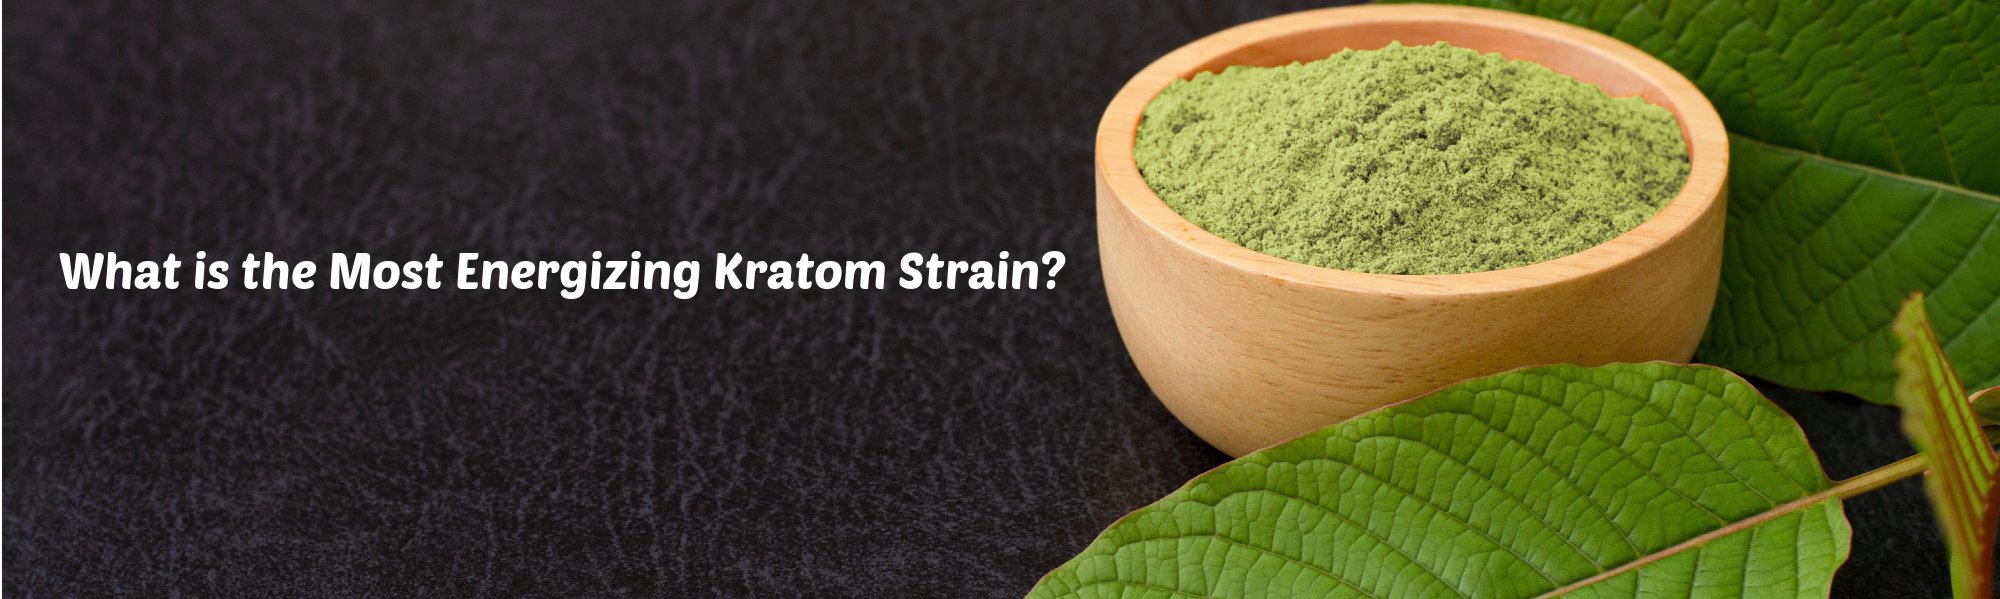 image of what is the most energizing kratom strain